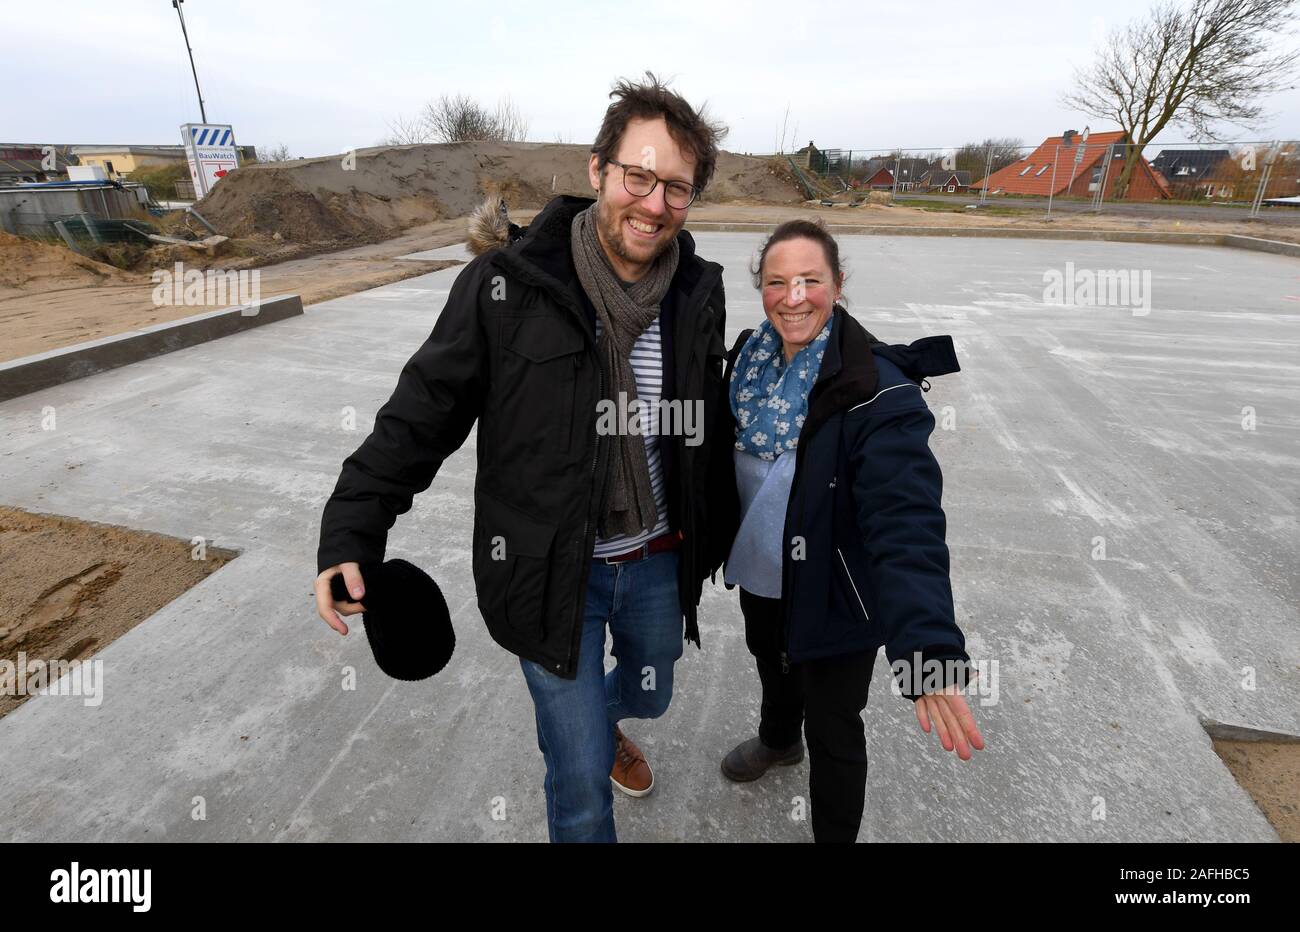 Friedrichskoog, Germany. 16th Dec, 2019. Jan Philipp Albrecht (Bündnis90/Die Grünen), Schleswig-Holstein Minister for Energy Turnaround, Agriculture, Environment, Nature and Digitisation and Tanja Rosenberger, Head of the Seal Station, are at the laying of the foundation stone for the extension and reconstruction of the seal station in the future entrance area. In addition to a new entrance building and exterior modernizations, a new exhibition building with a seal observation room is planned. Credit: Carsten Rehder/dpa/Alamy Live News Stock Photo